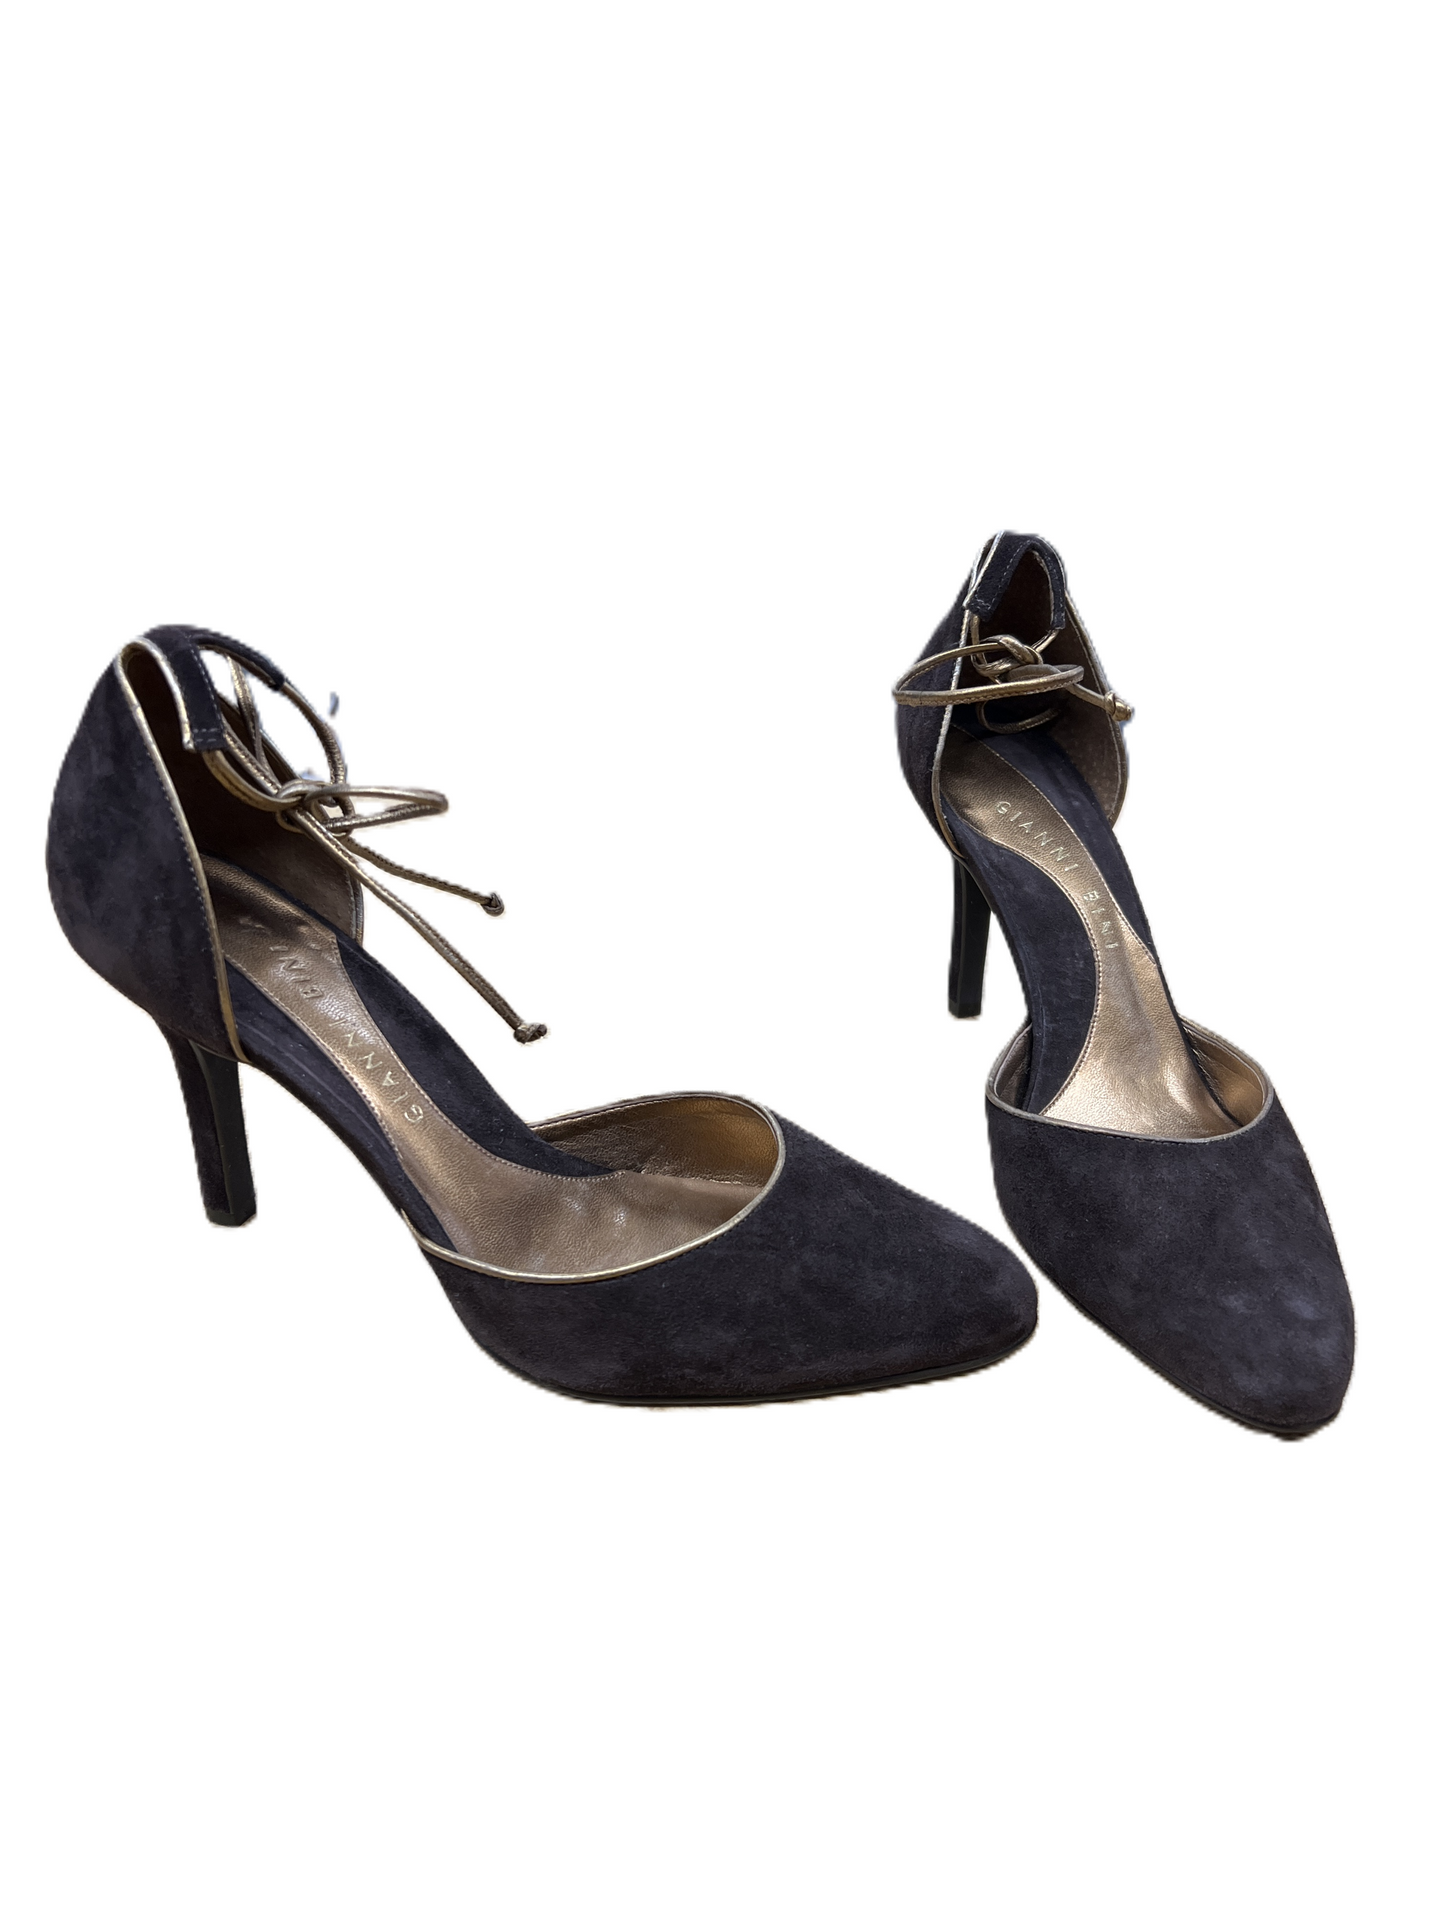 Shoes Heels D Orsay By Gianni Bini  Size: 8.5